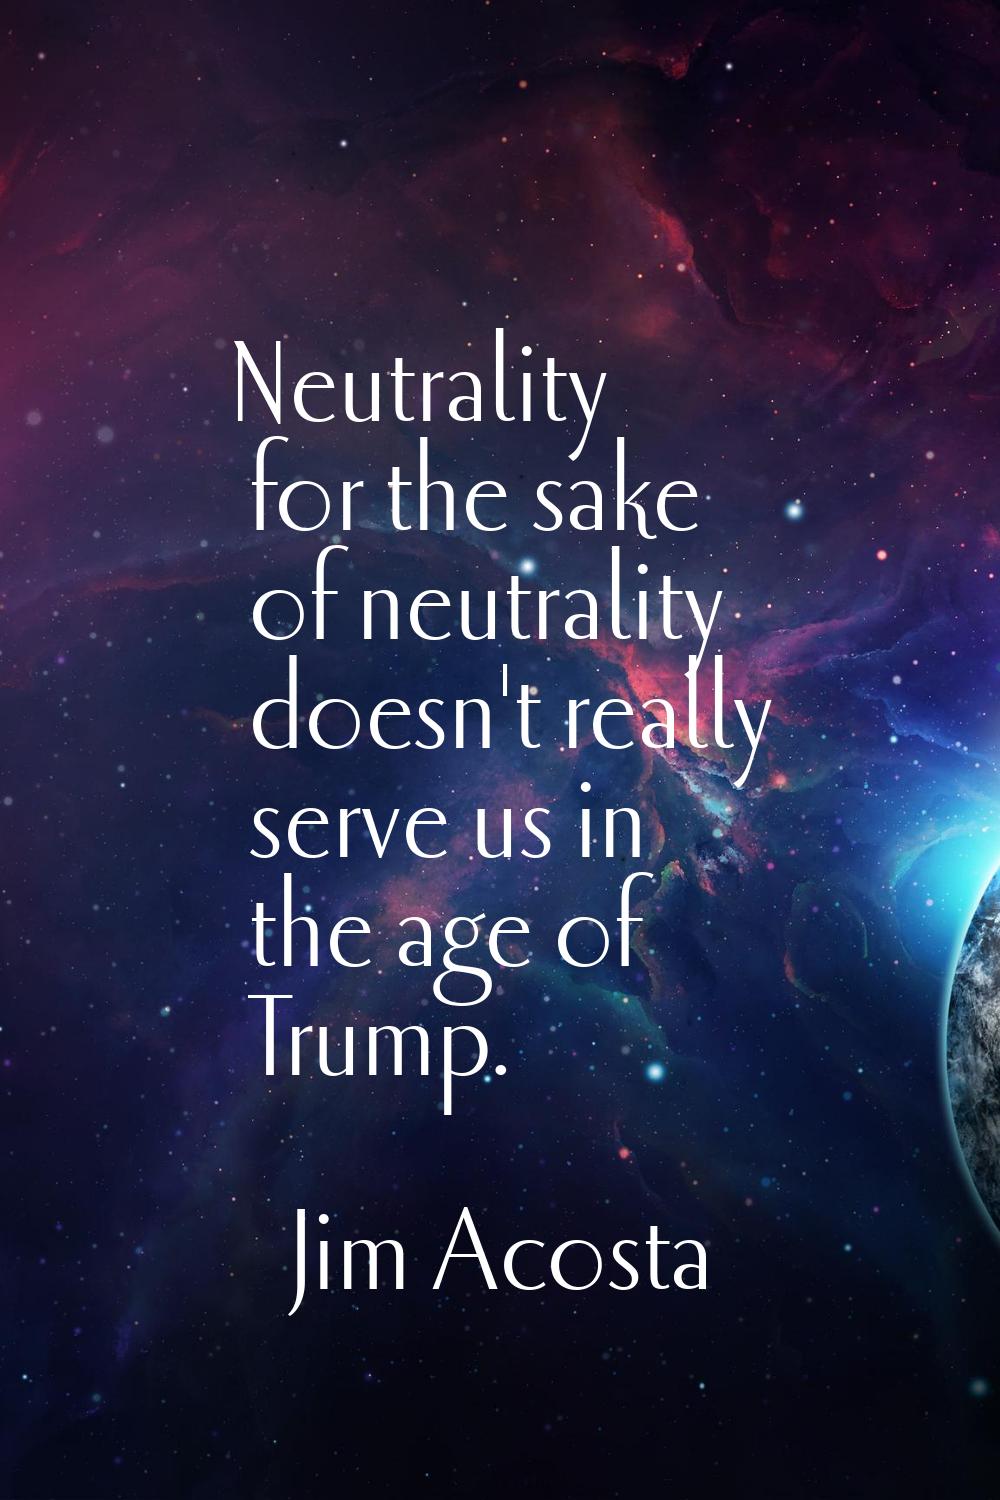 Neutrality for the sake of neutrality doesn't really serve us in the age of Trump.